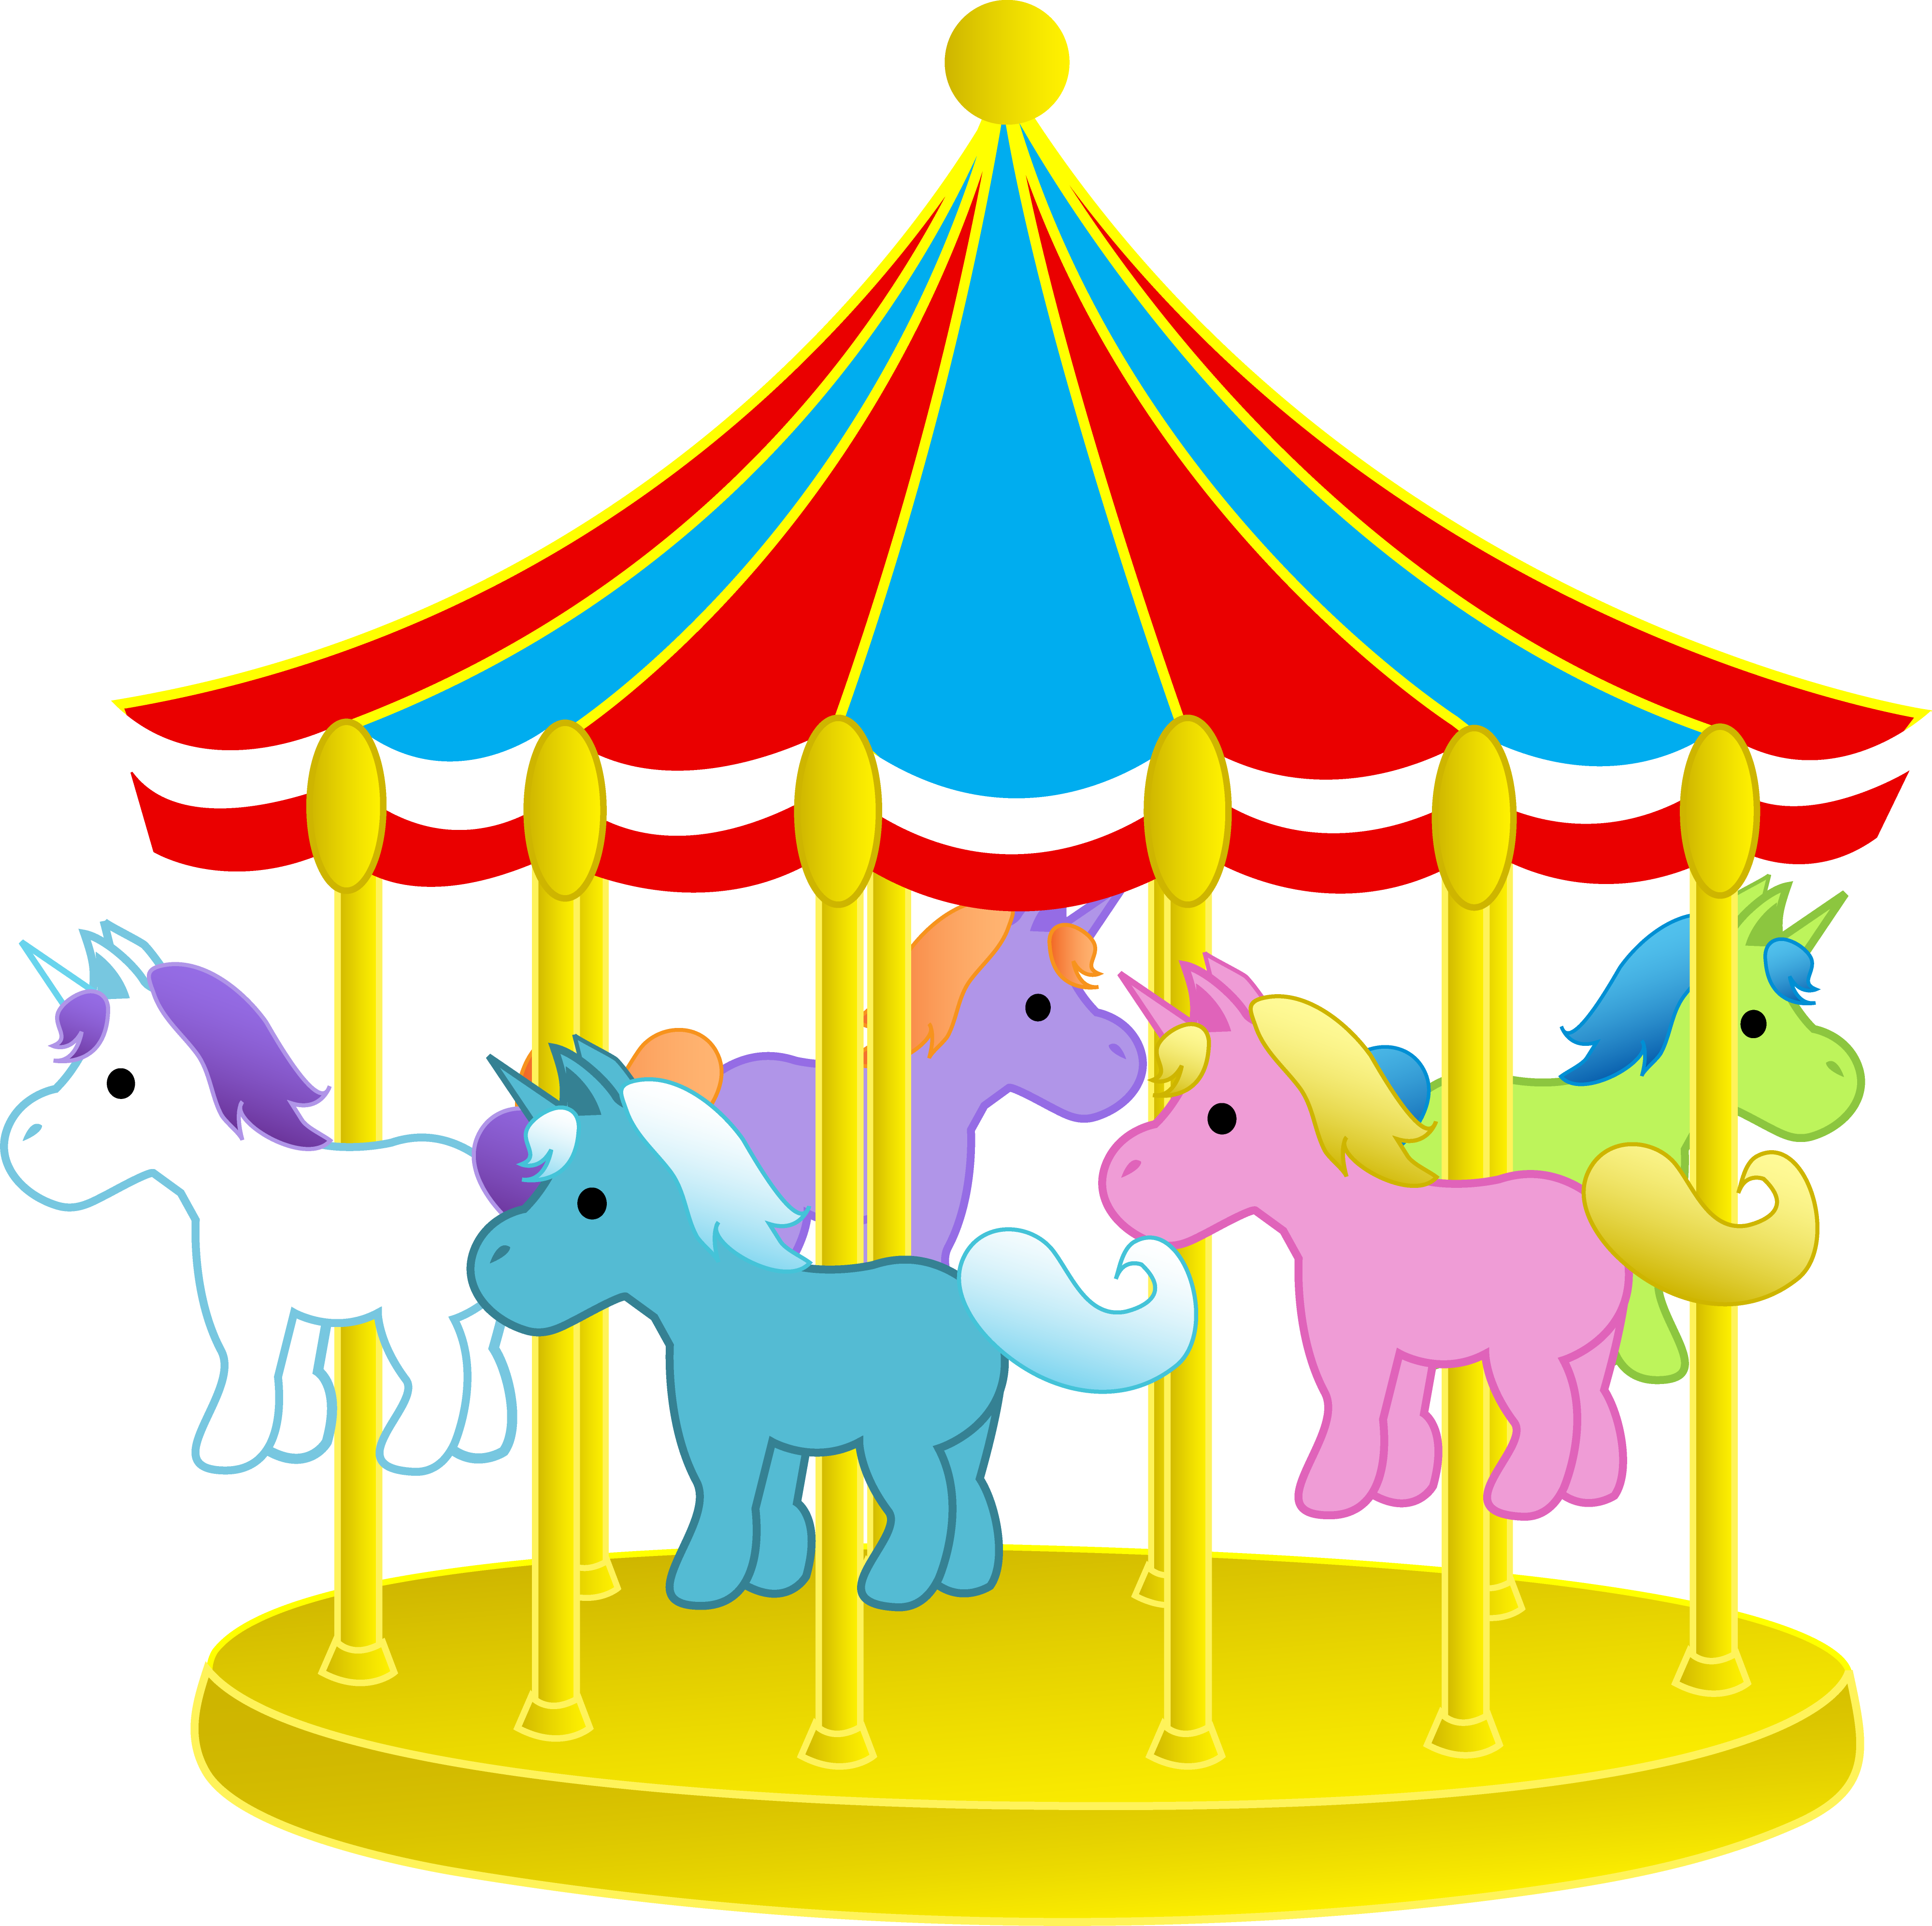 A Carousel With Unicorns On It